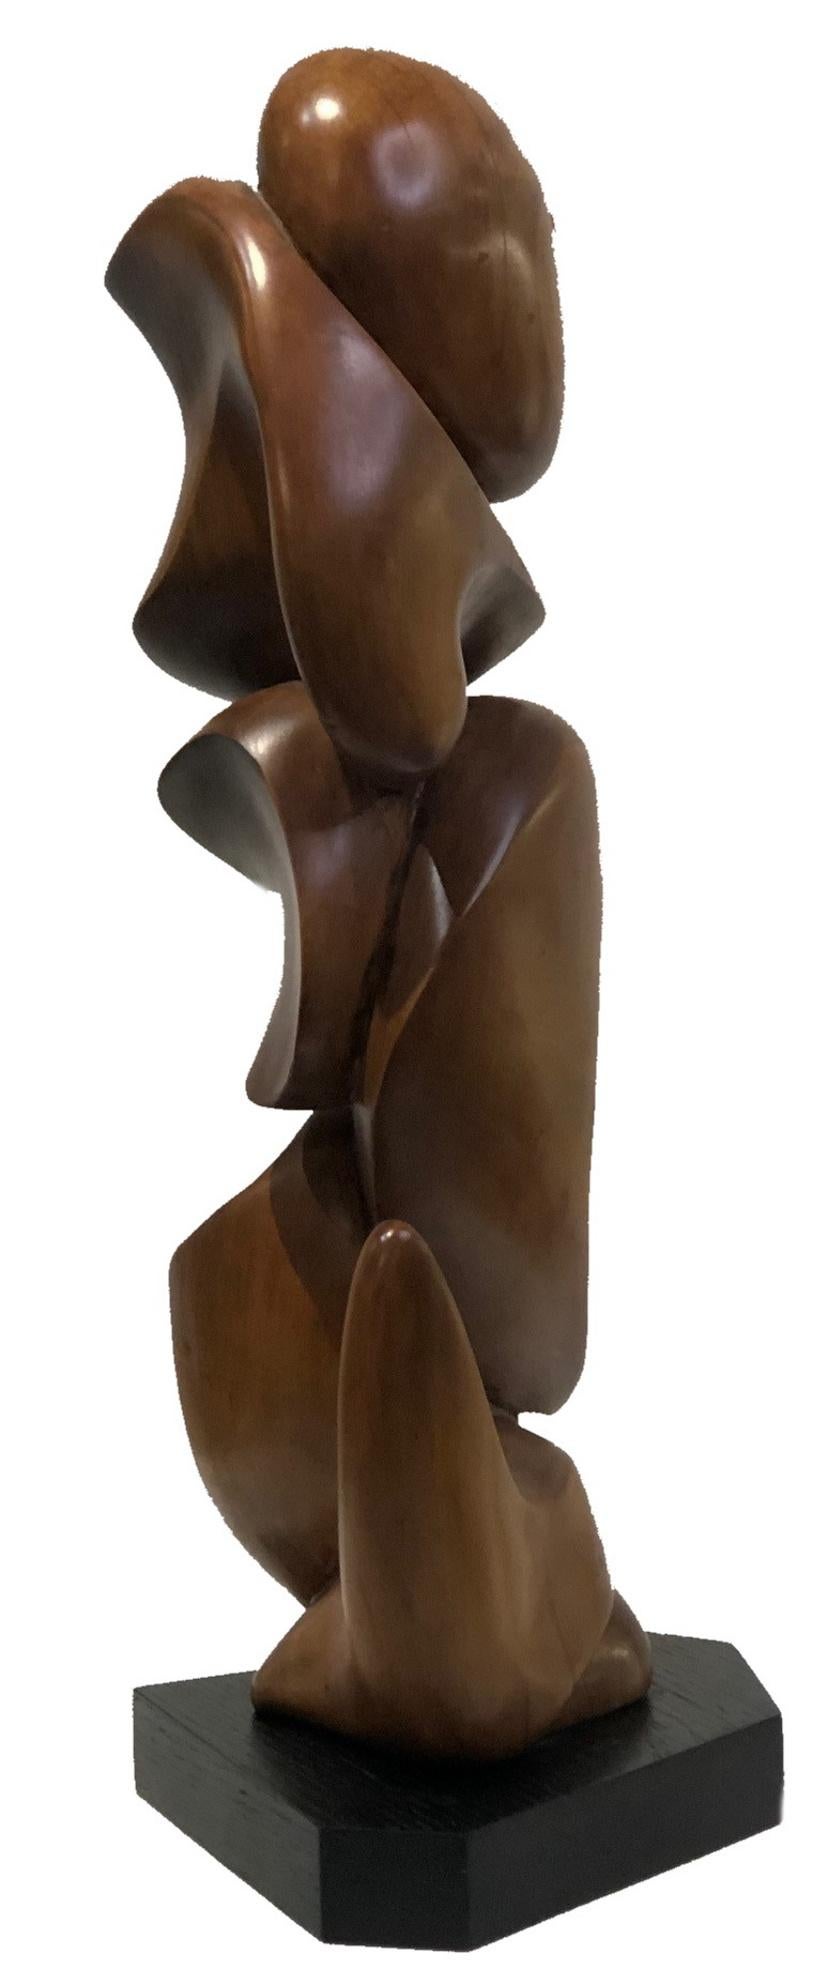 Japanese Mid-Century Modern Carved Wood Sculpture in manner of Takao Kimura, ca. 1960 For Sale